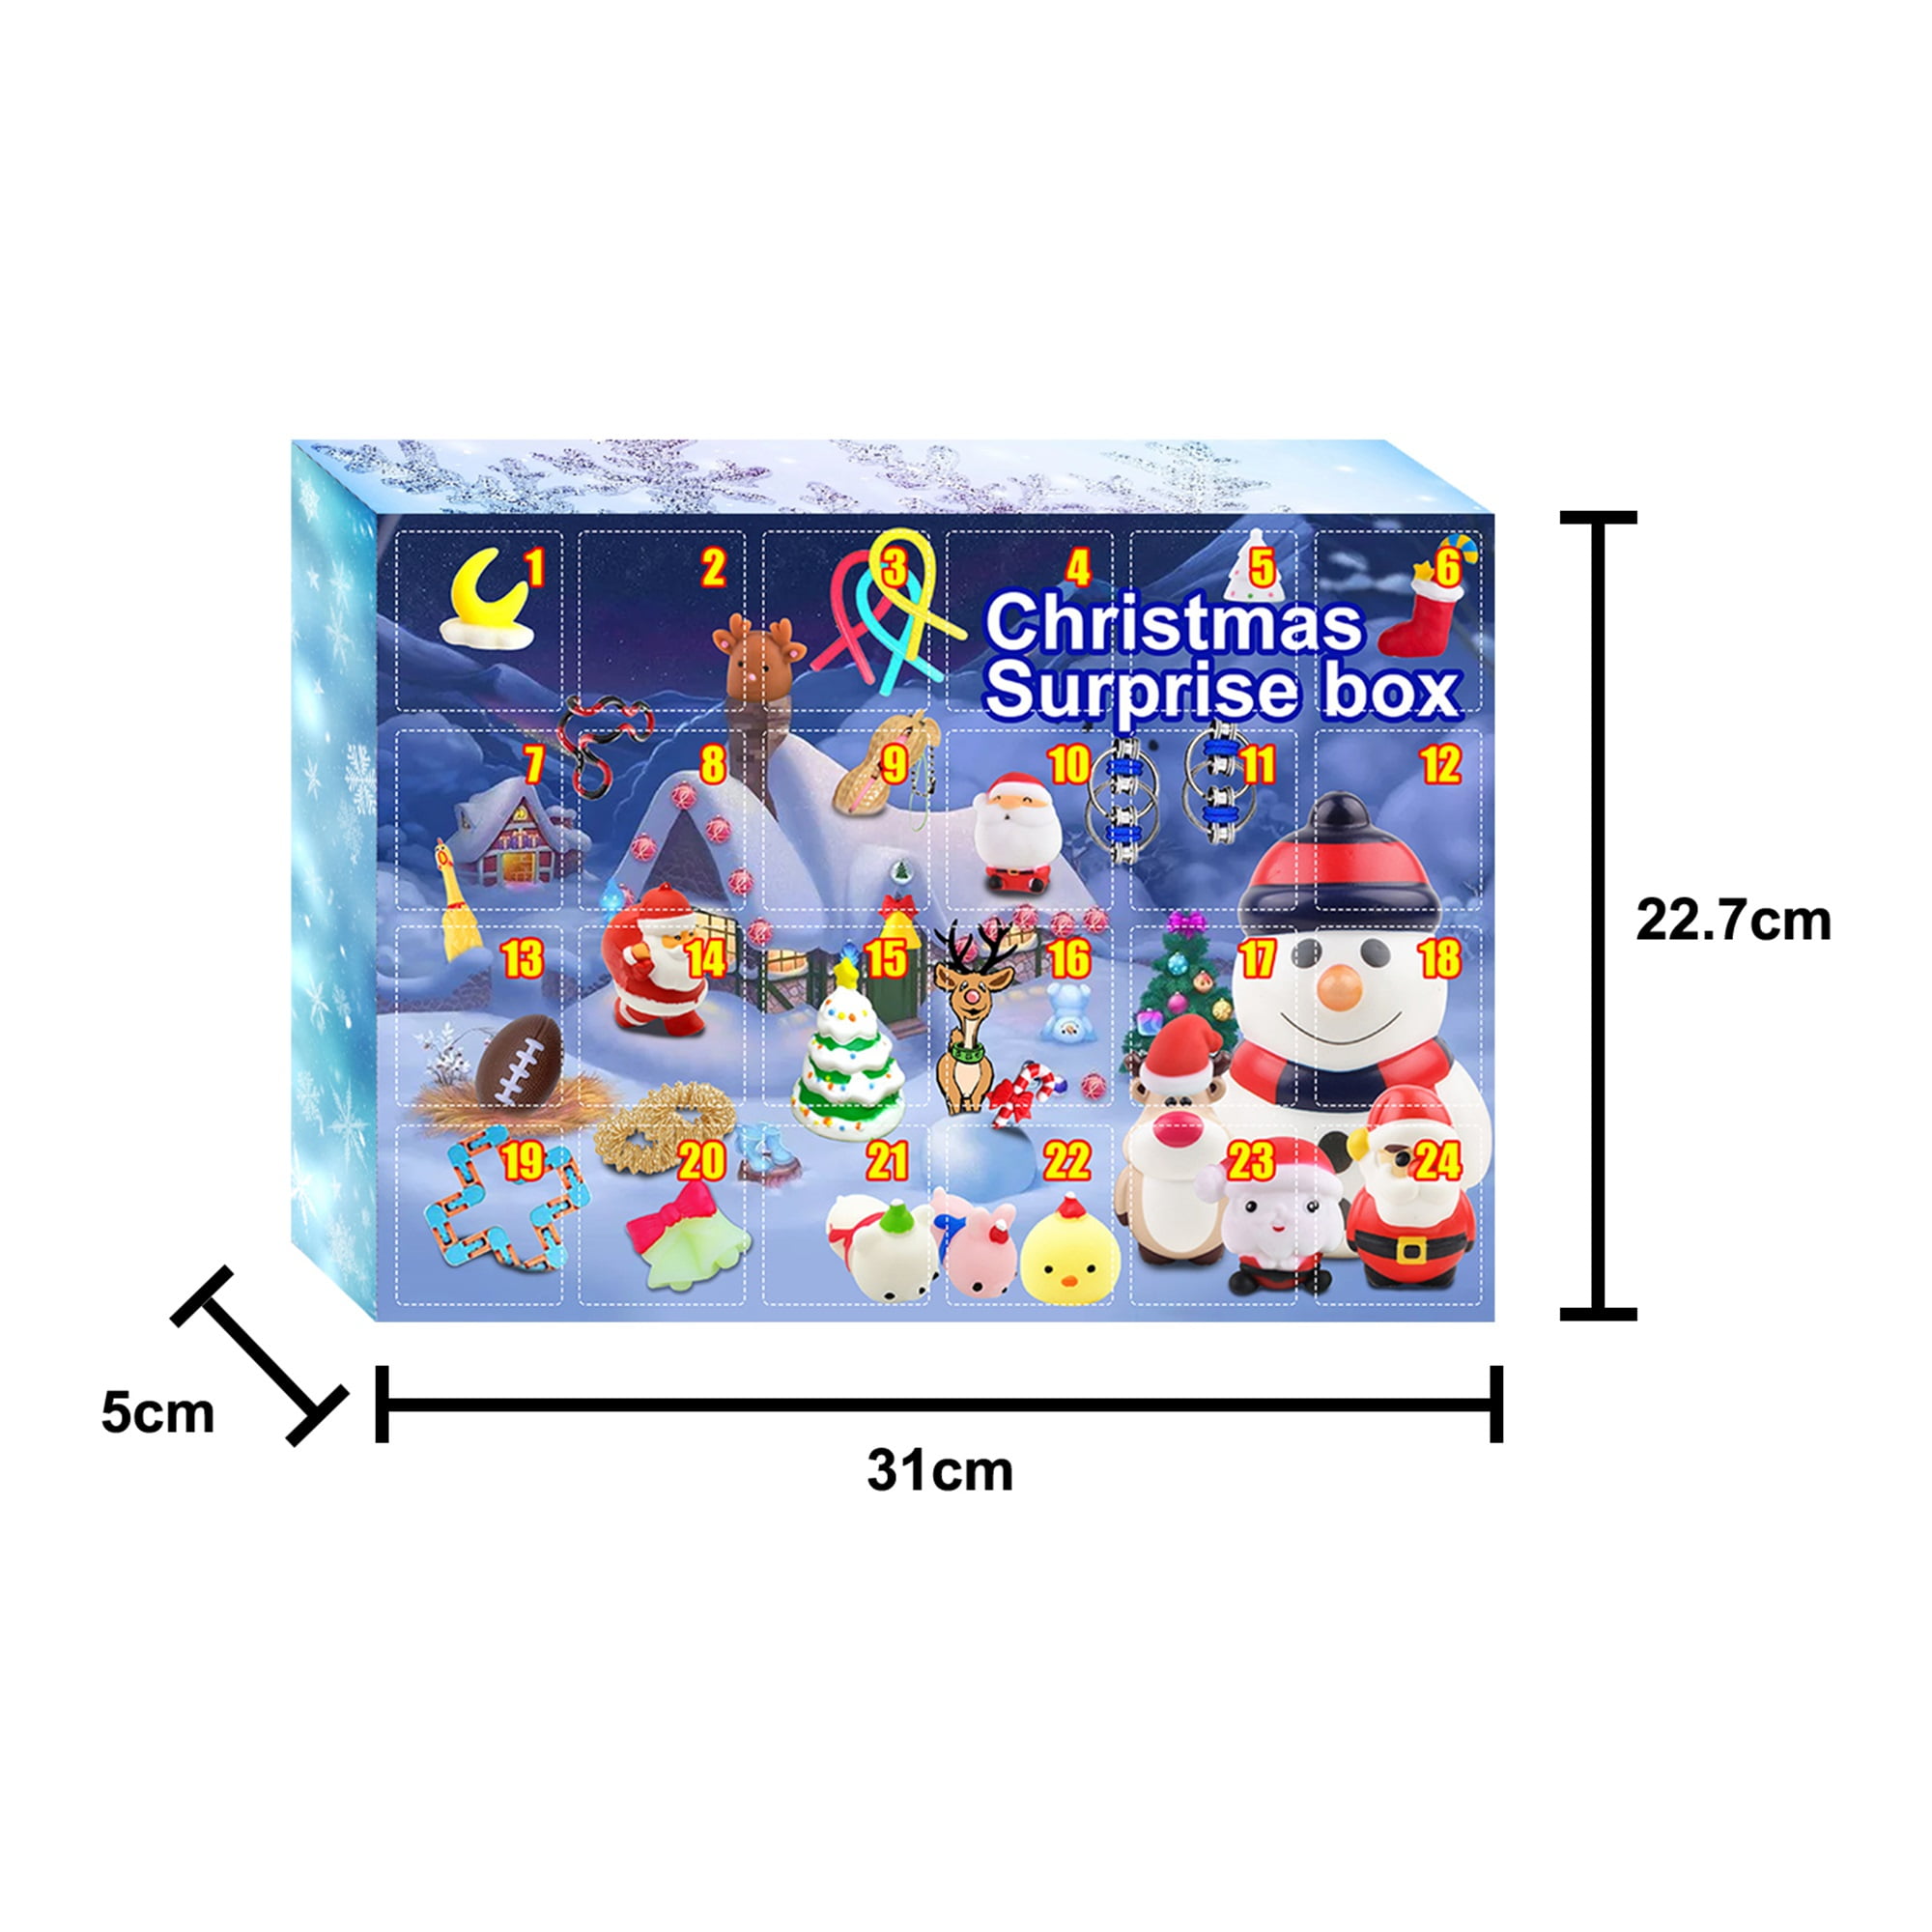 Christmas Holiday Surprise Toy Box – Your Fam Box